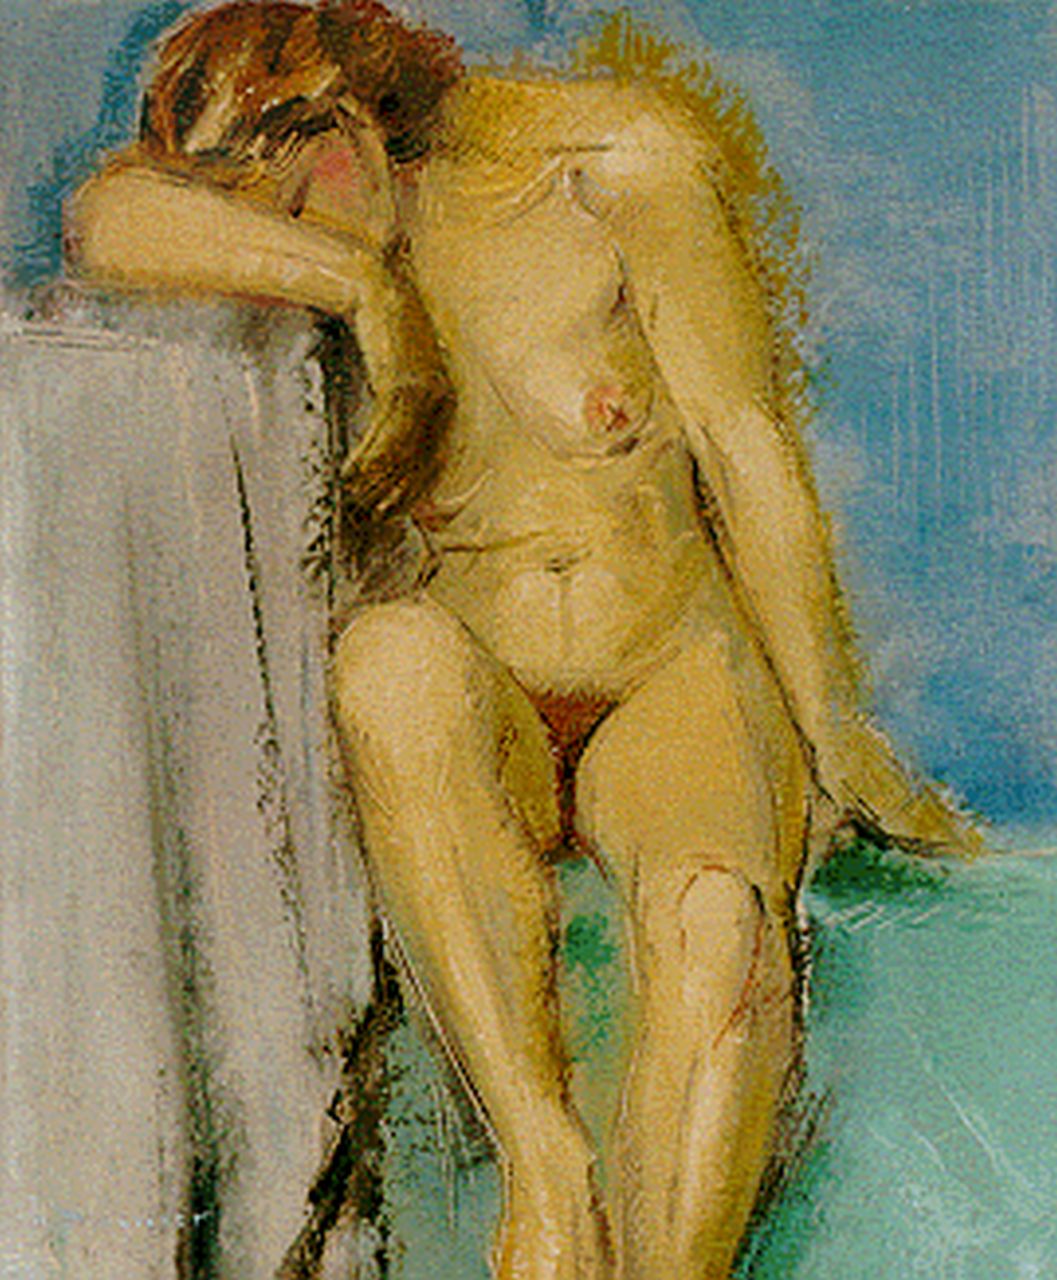 Pinguenet H.  | Henri Pinguenet, A seated nude, oil on panel 47.1 x 38.8 cm, signed l.l.